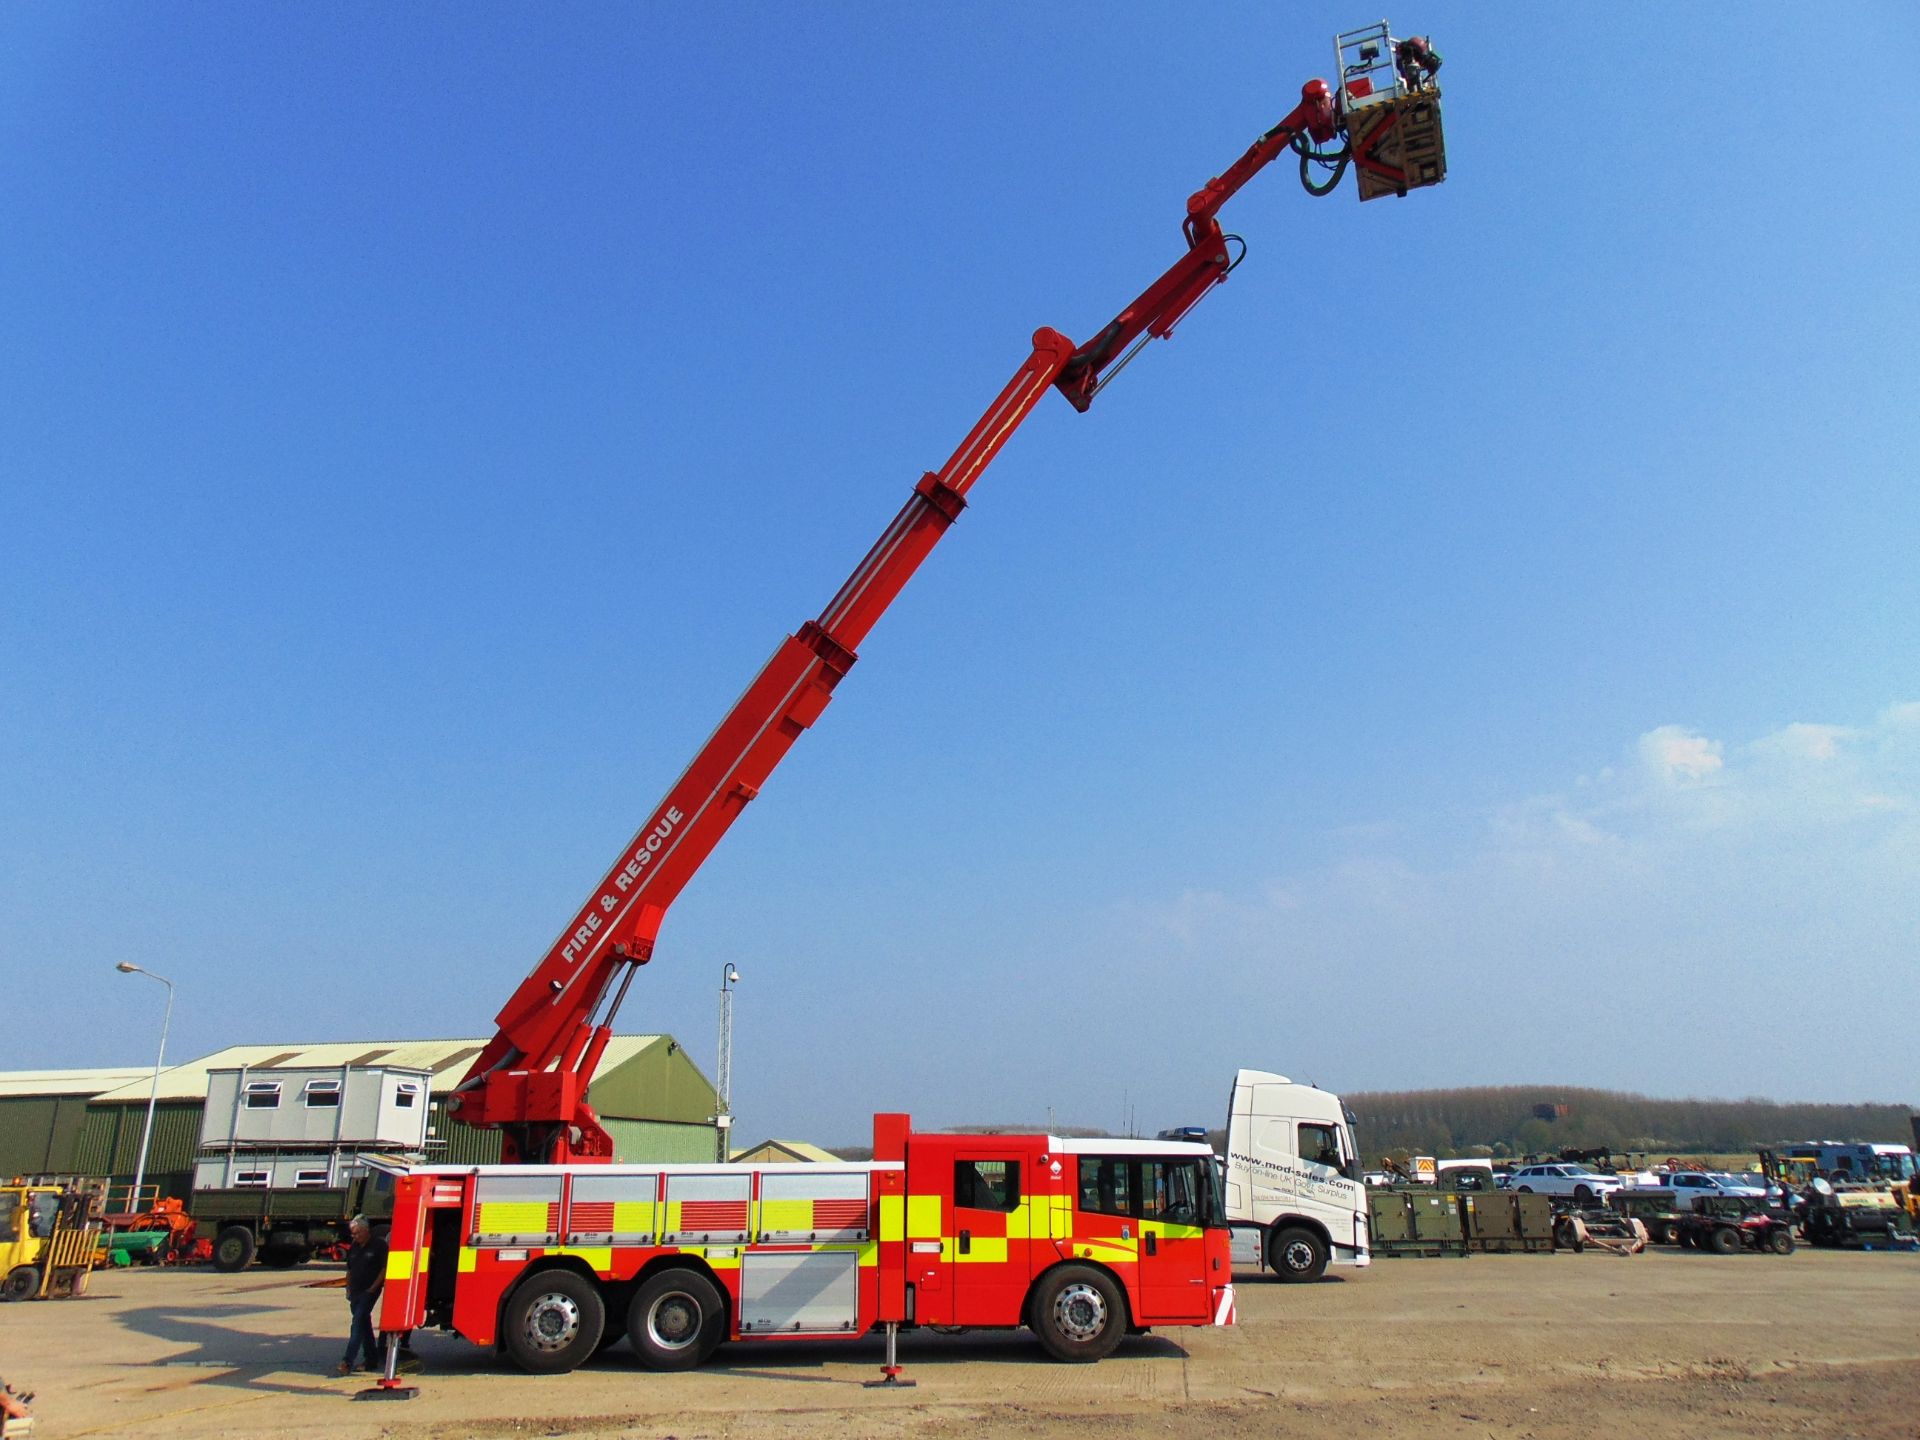 Mercedes Econic 2633 Aerial Rescue Fire Fighting Appliance - Image 10 of 57